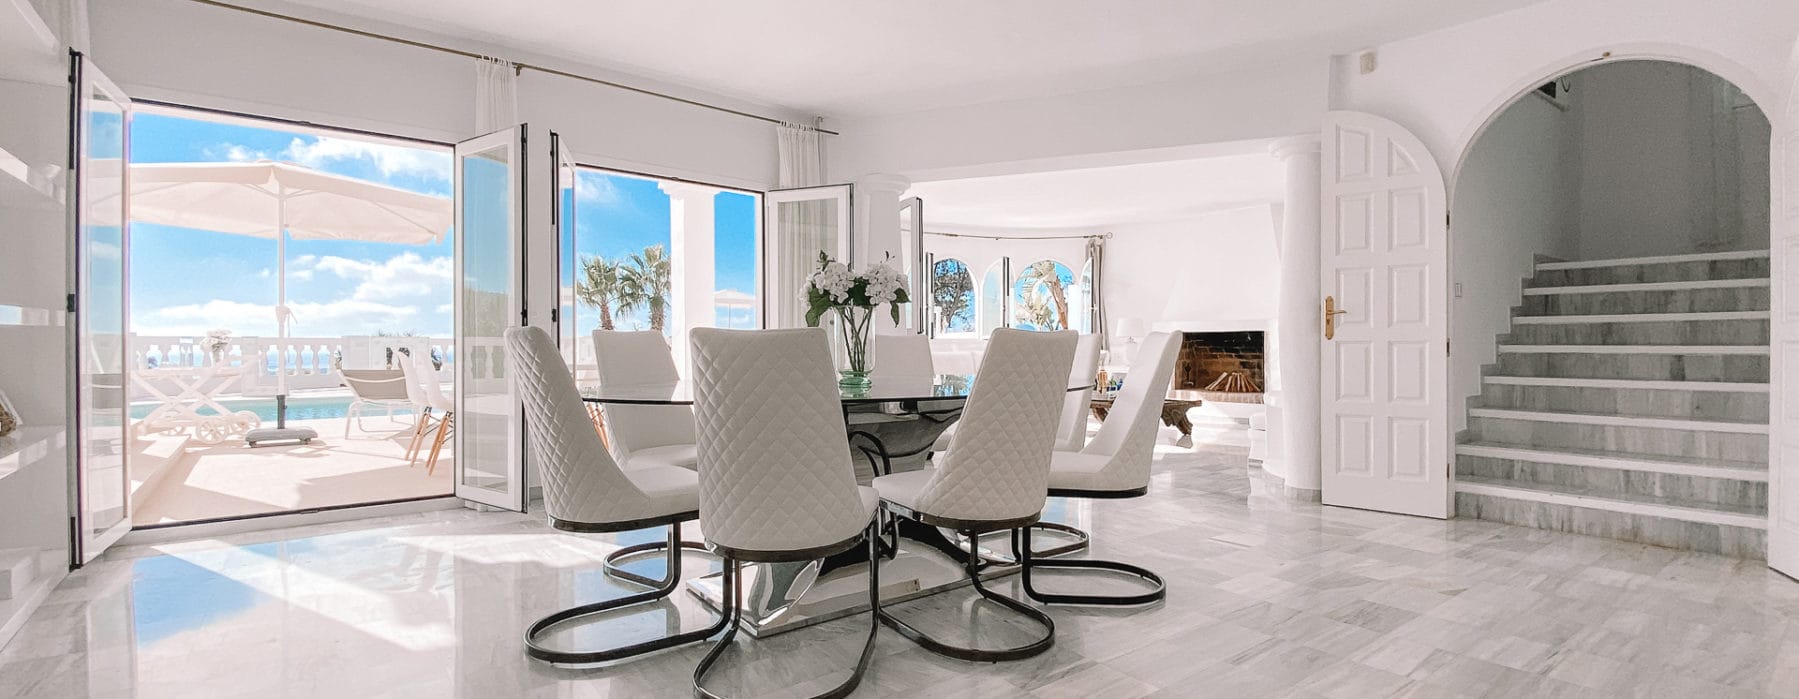 Round glass dining table with white chairs in the living room parallel to pool terrace